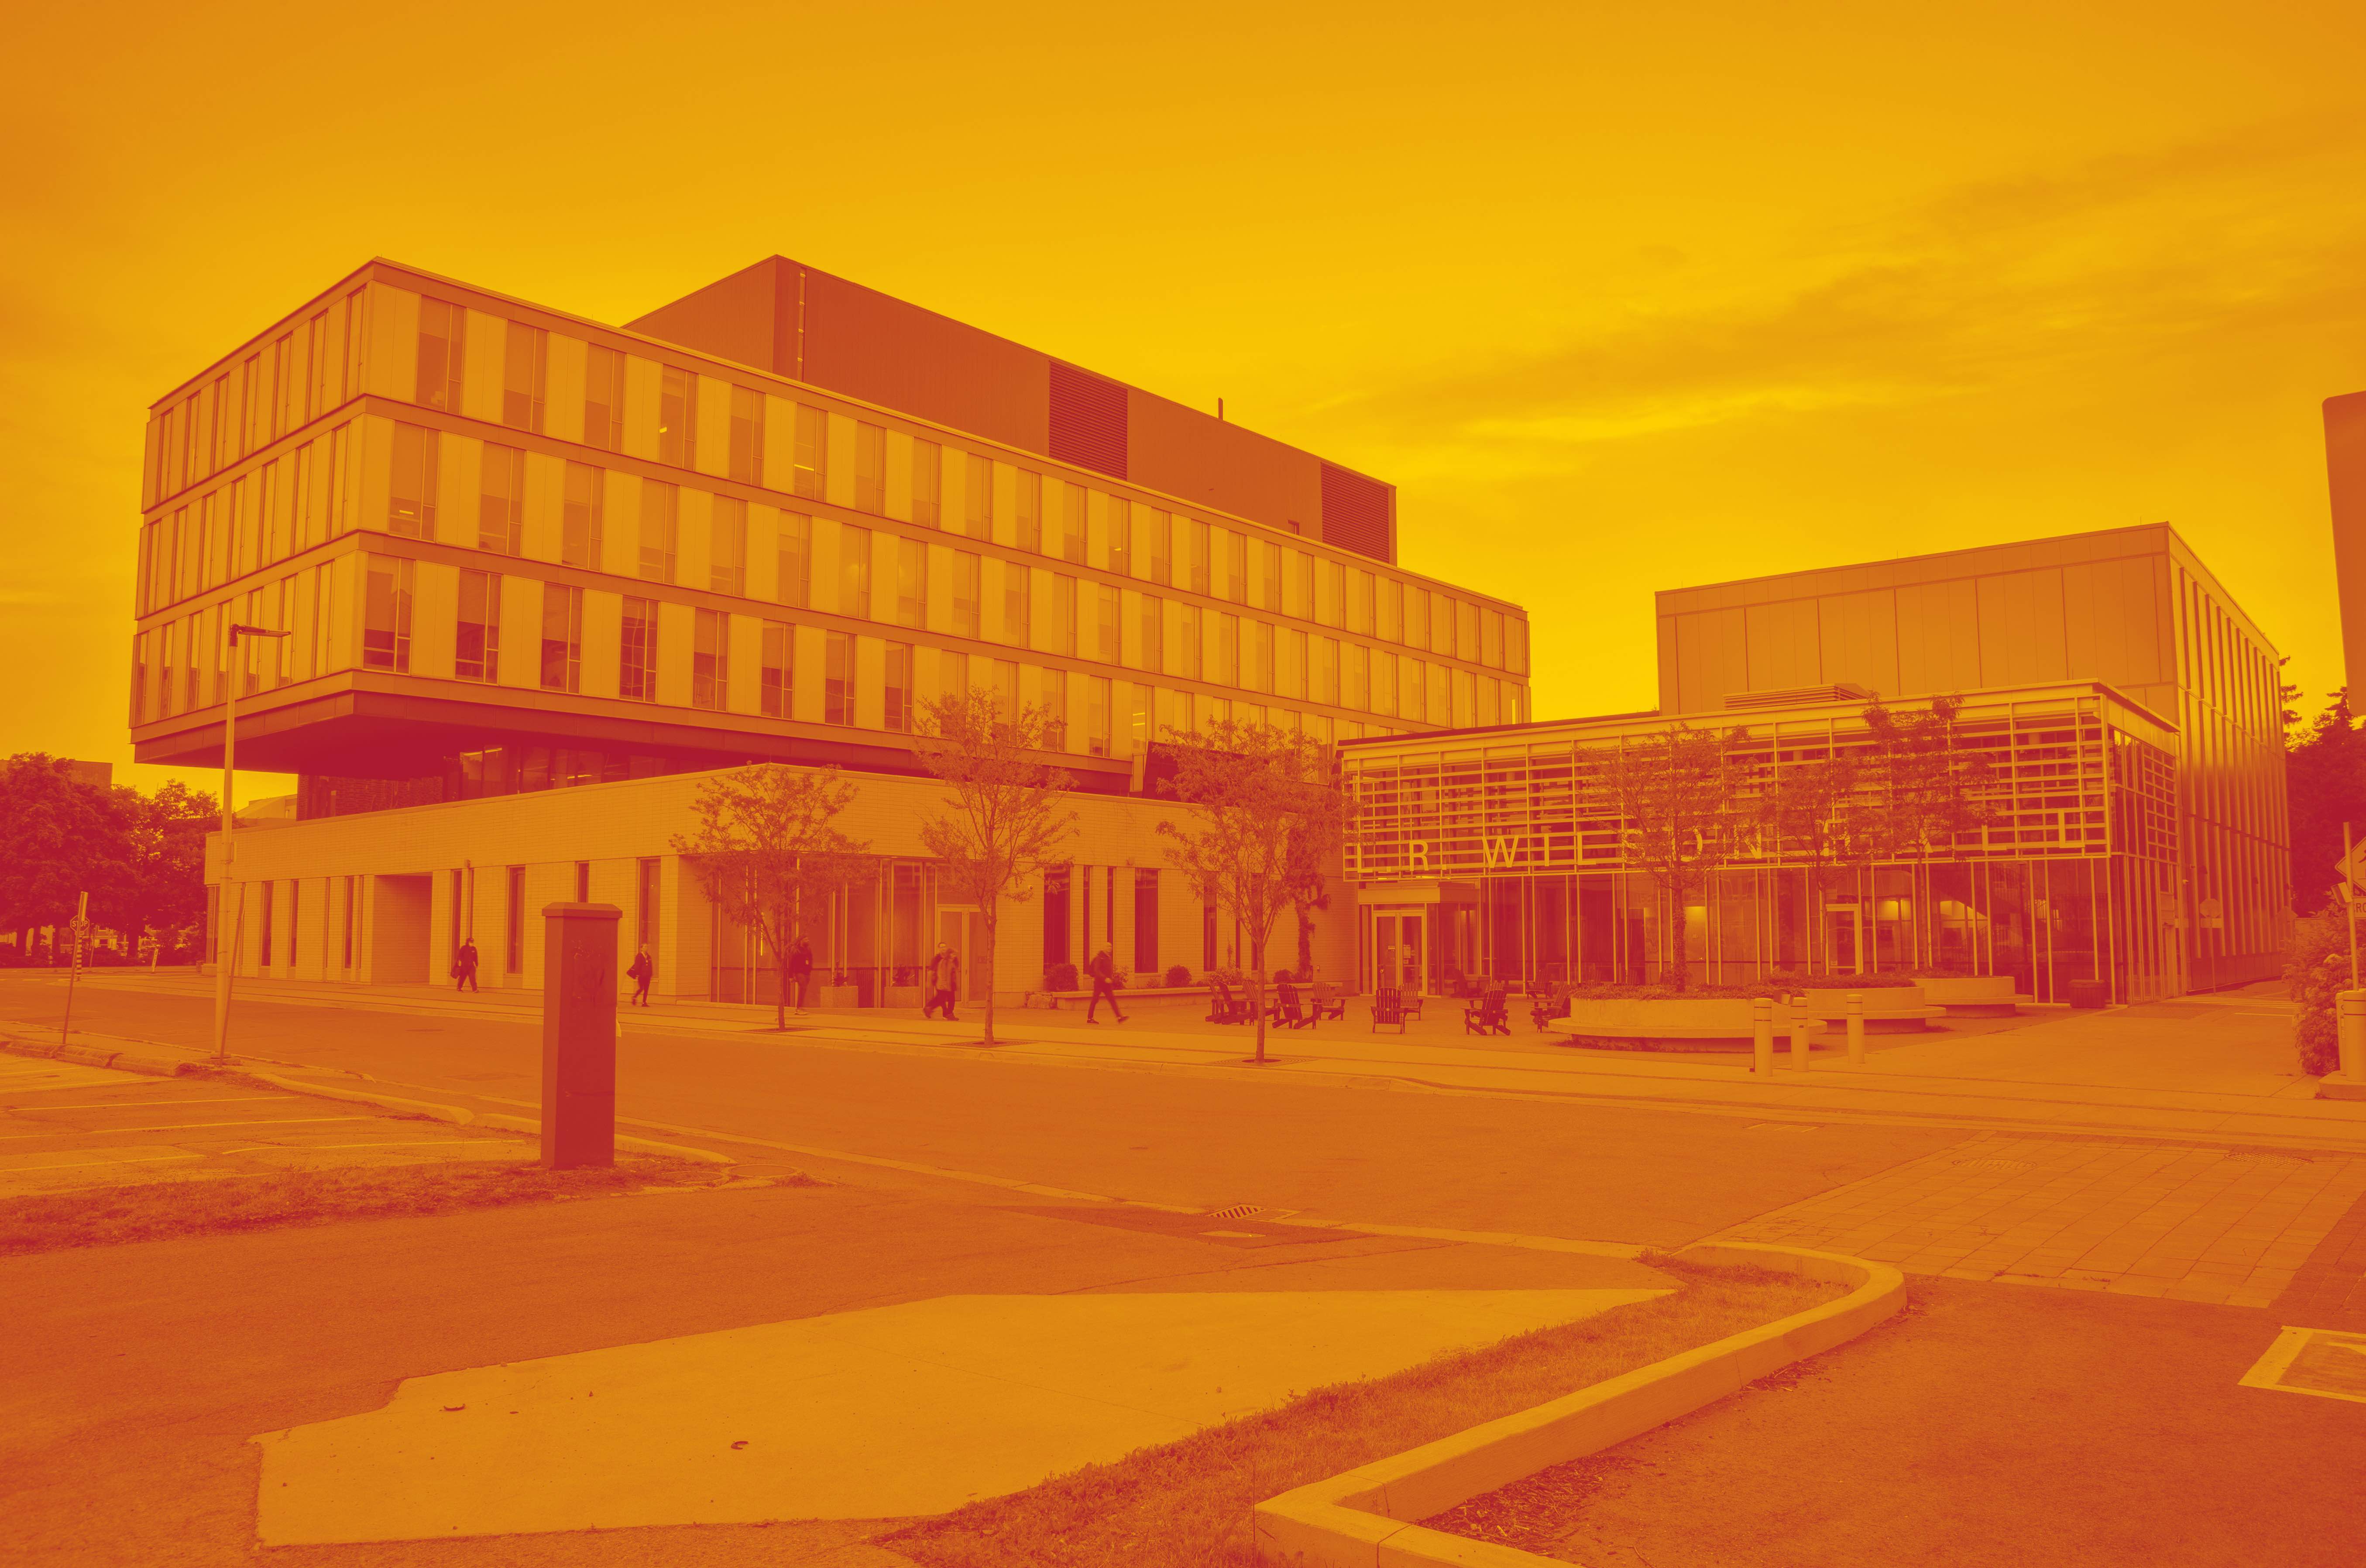 Image features the outside of the LR Wilson building. The Spark Centre is located within LR Wilson. A yellow and red duotone filter has been placed over the image.